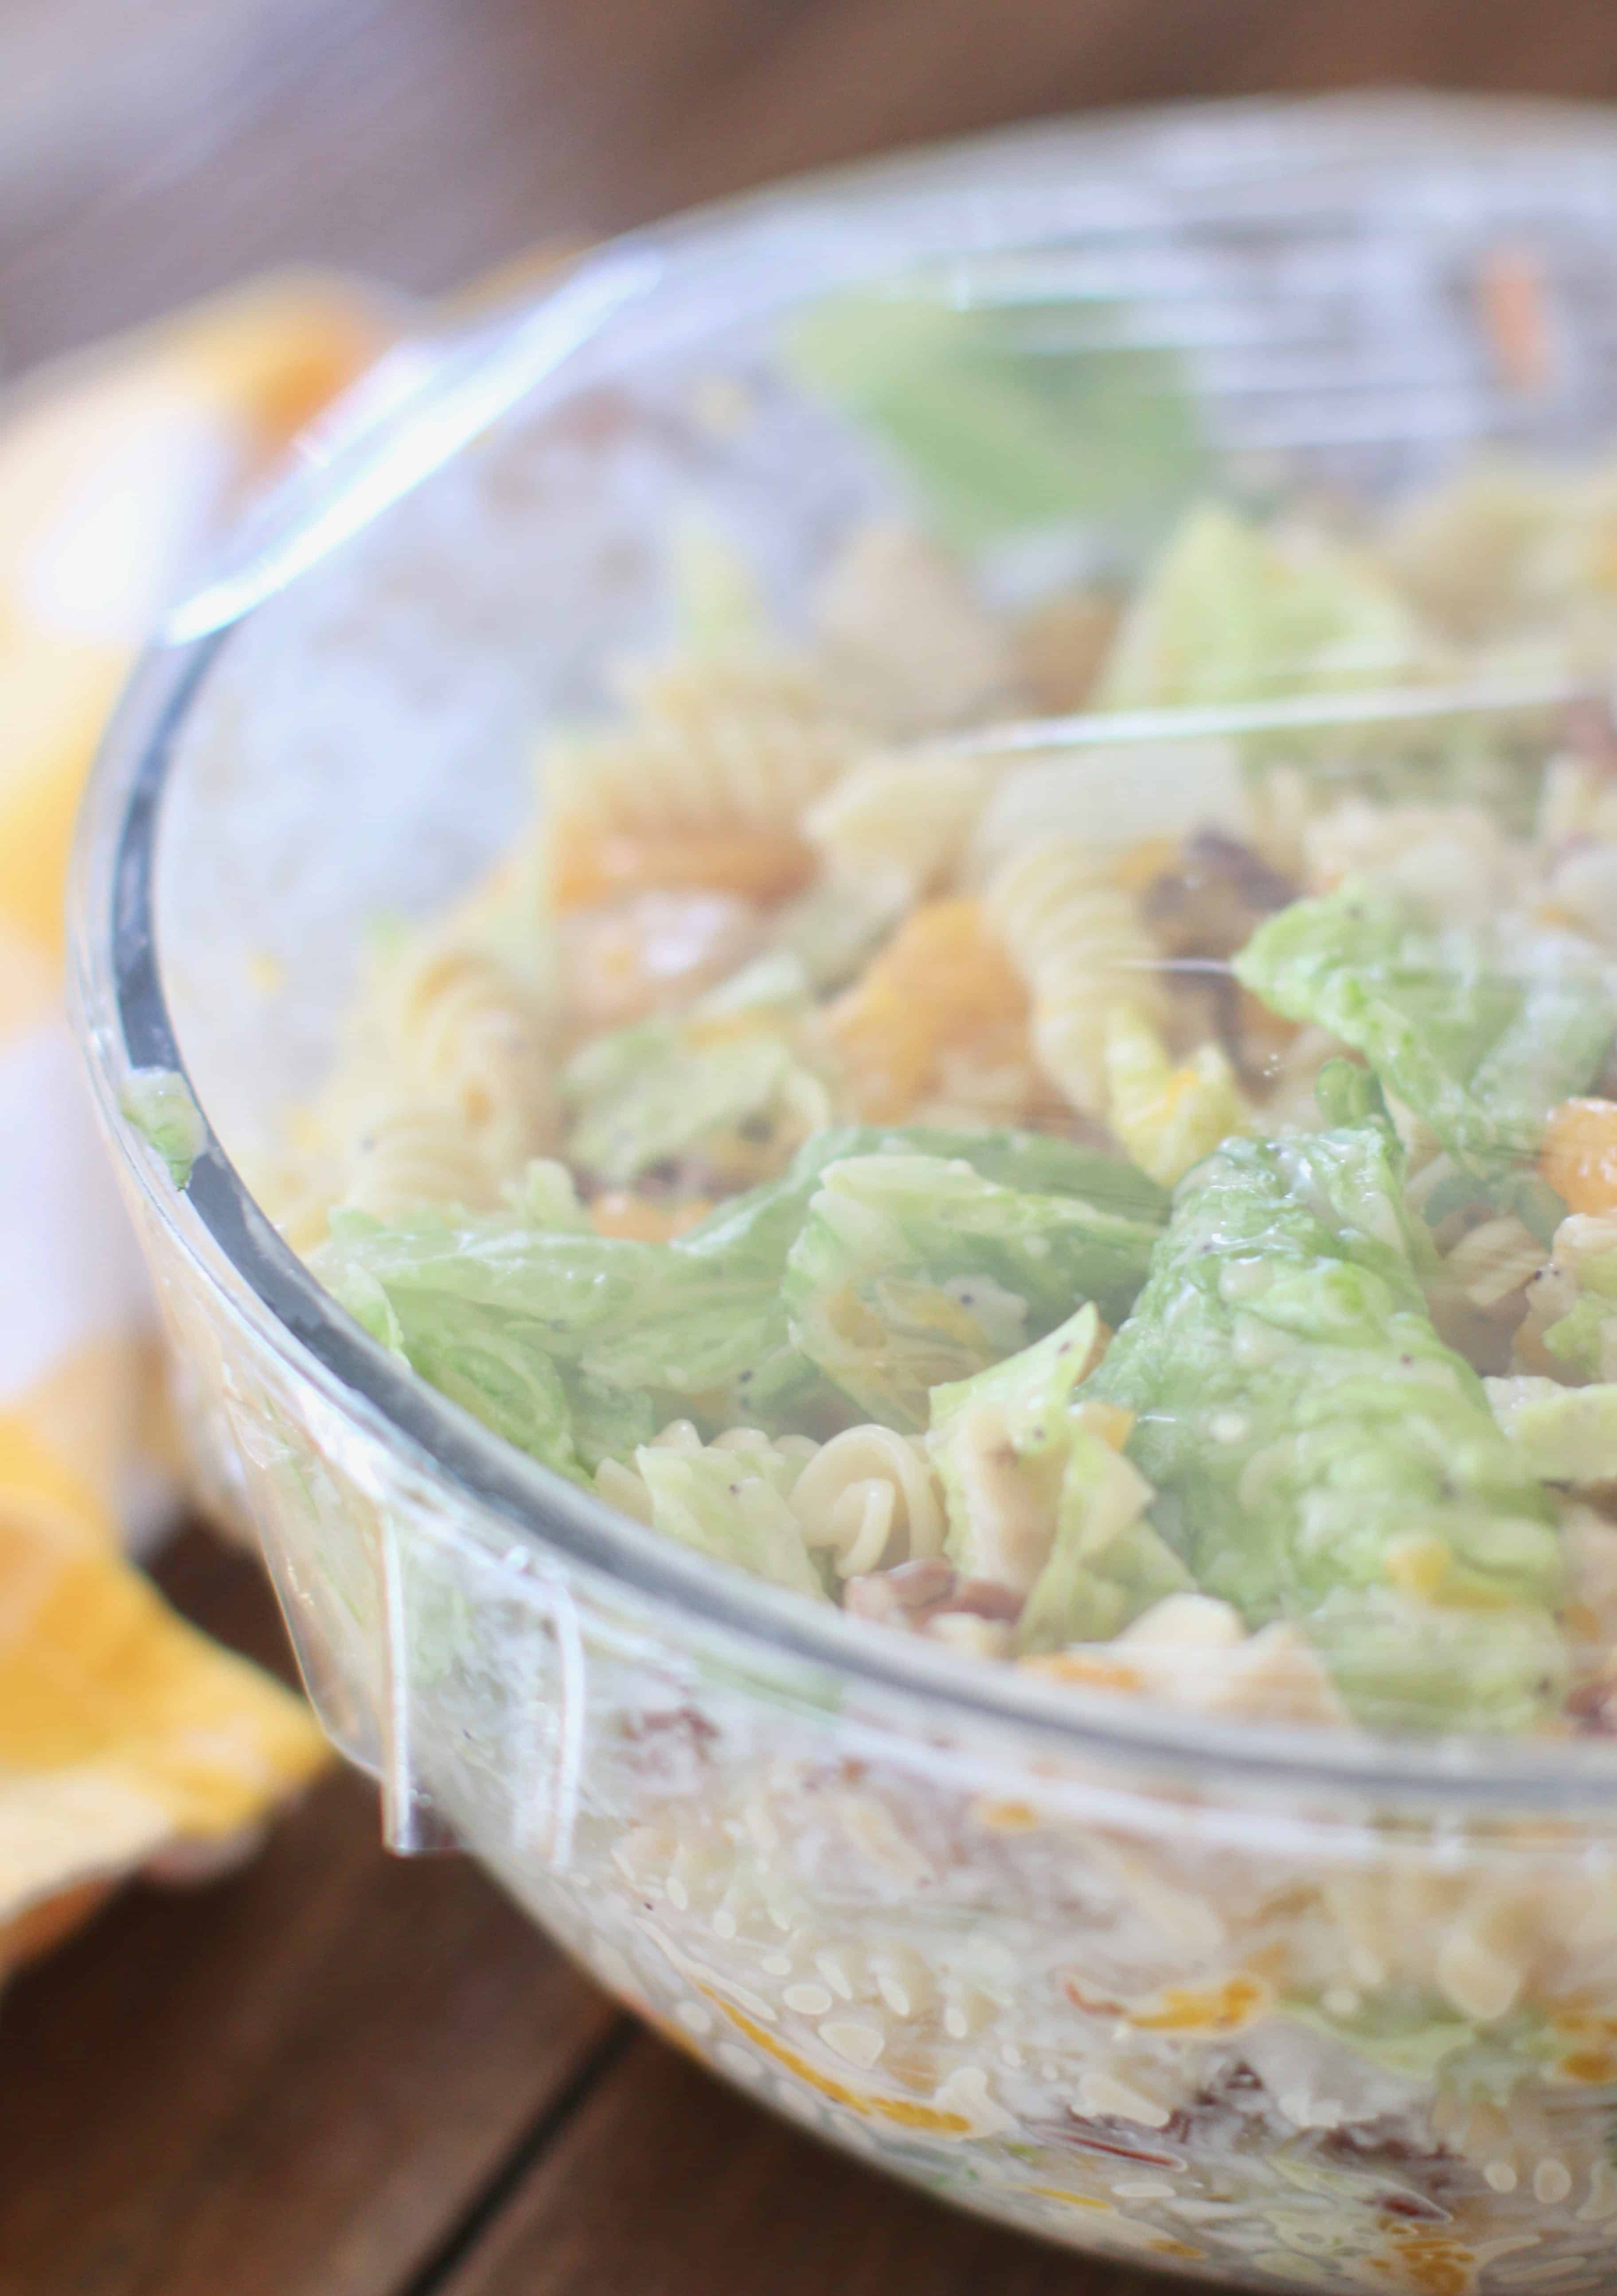 plastic wrap covered bowl with pasta, grilled chicken, lettuce, pecans and mandarin oranges.